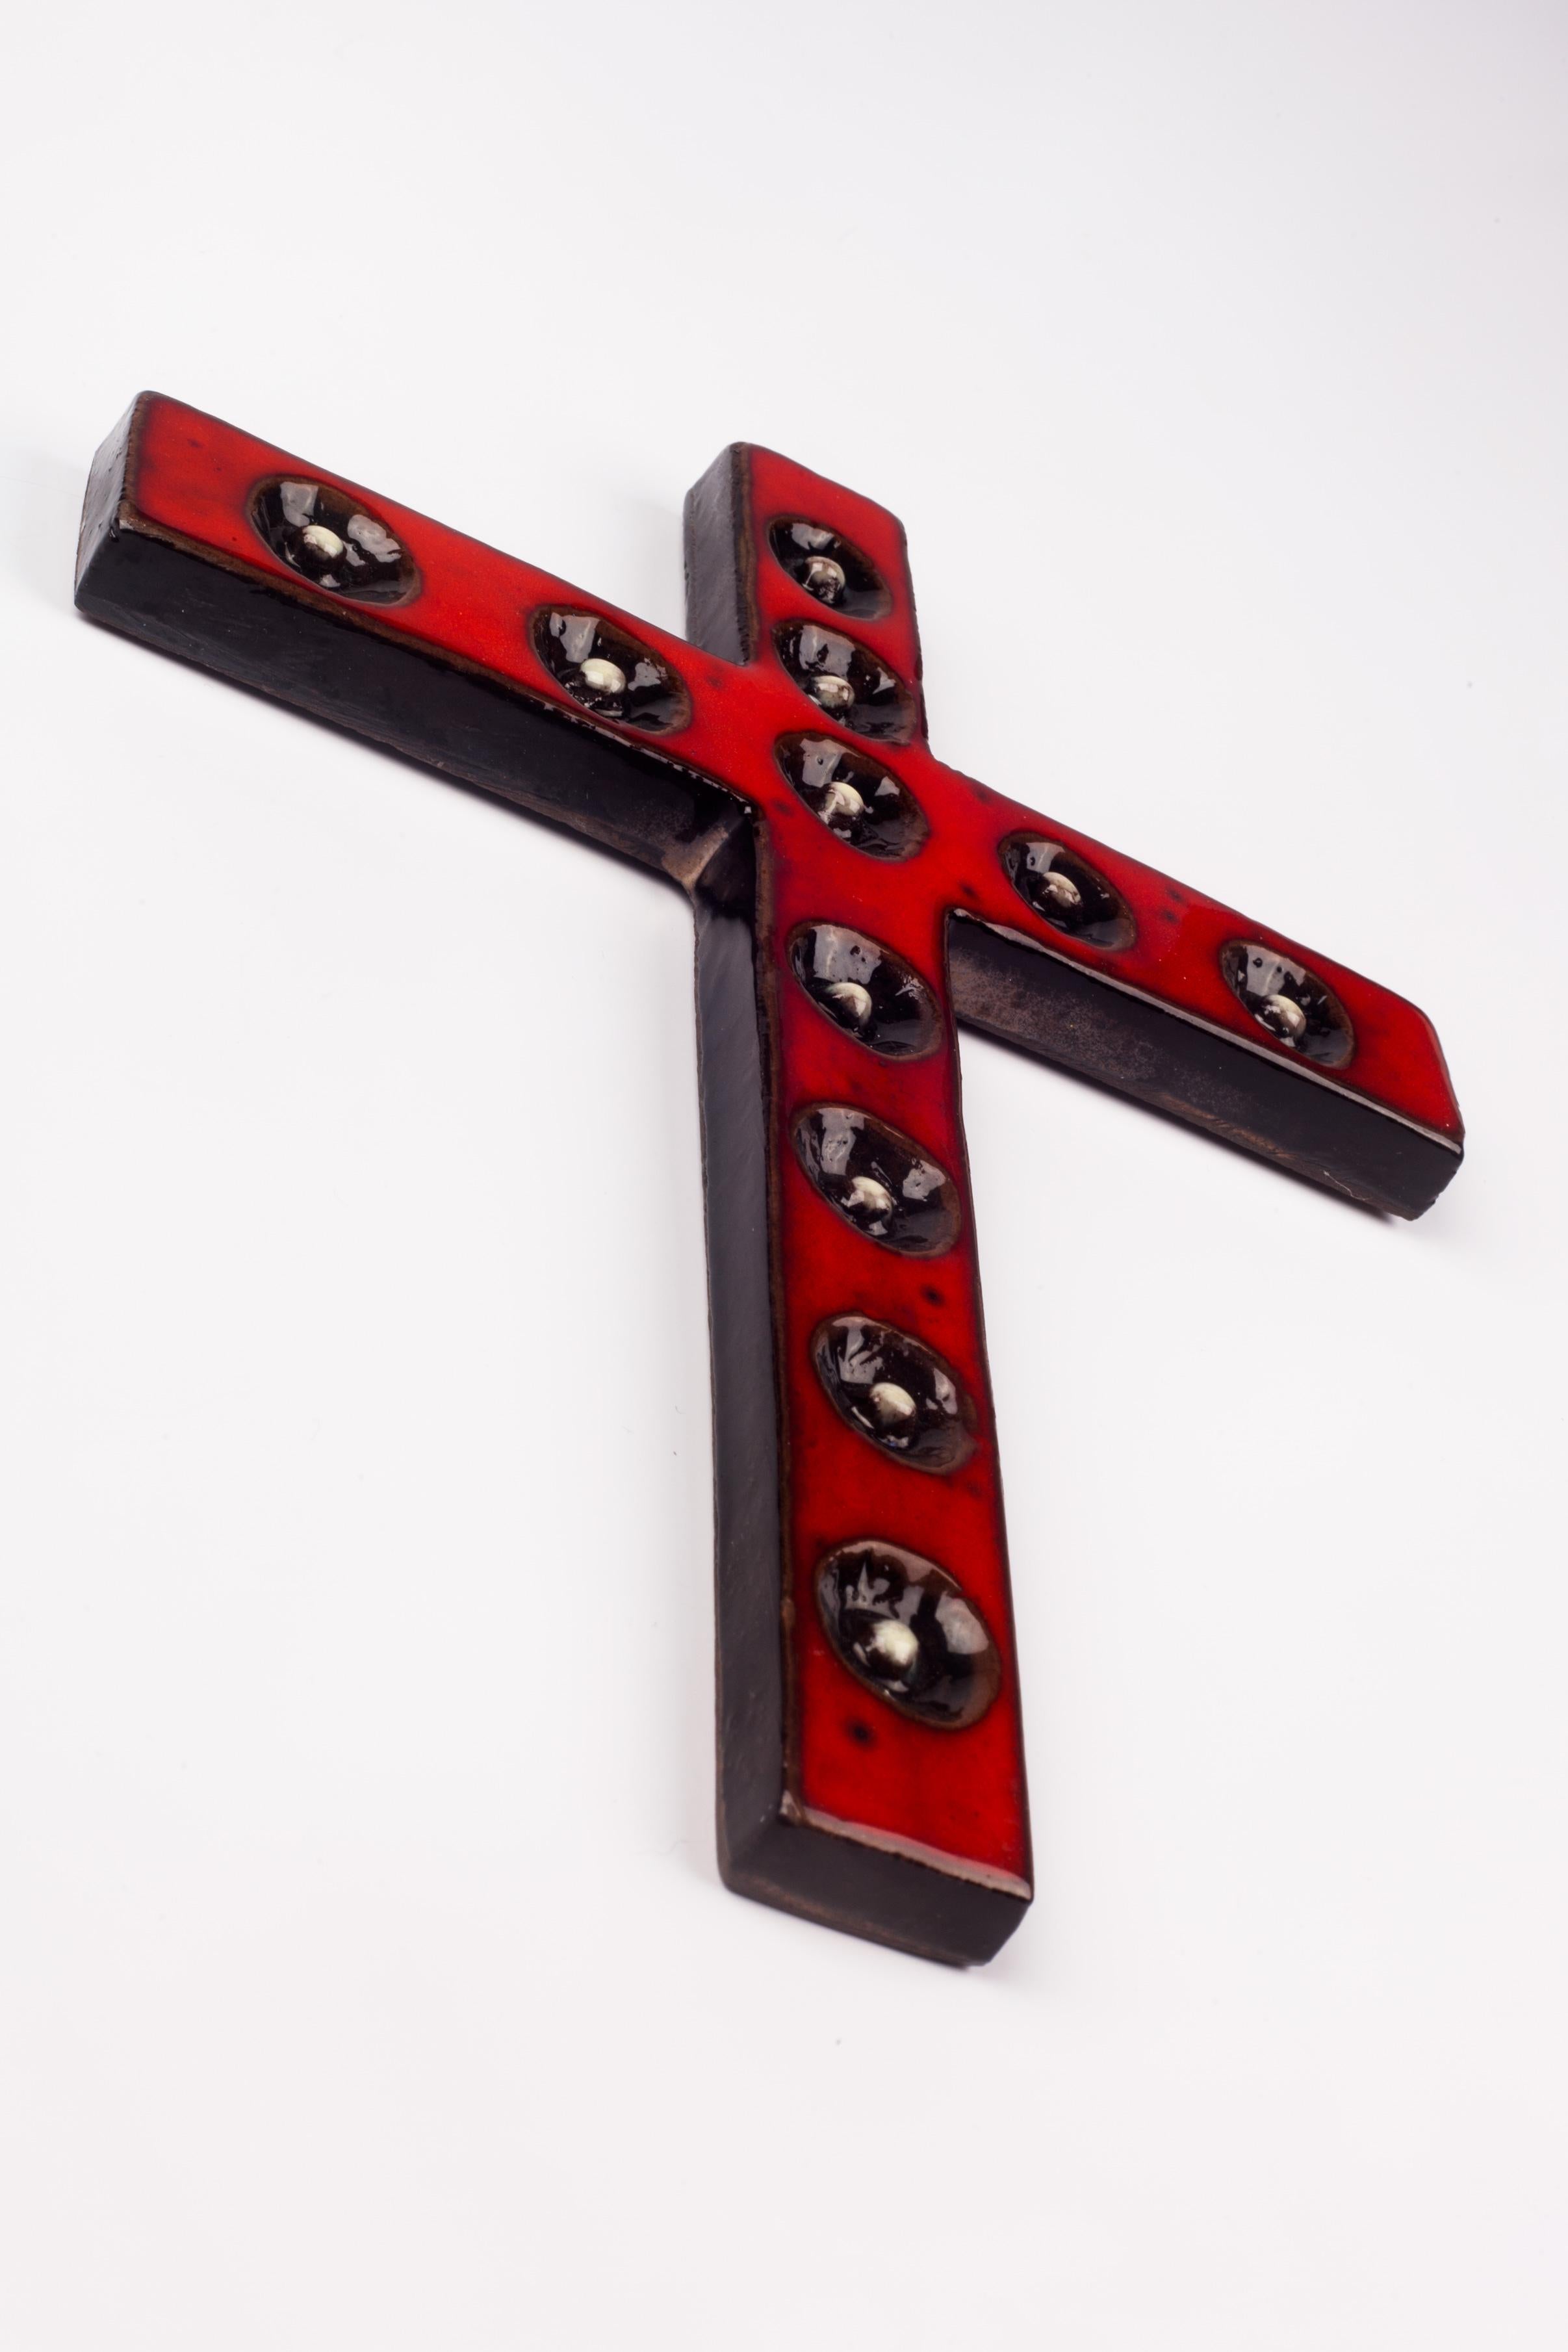 Decorative wall crucifix in ceramic, handmade by an artisan in Belgium in the 1970s. Glossy red cross with concave black decorative circles with white center details in volume.

From modernism to brutalism, the crosses in our collection range from